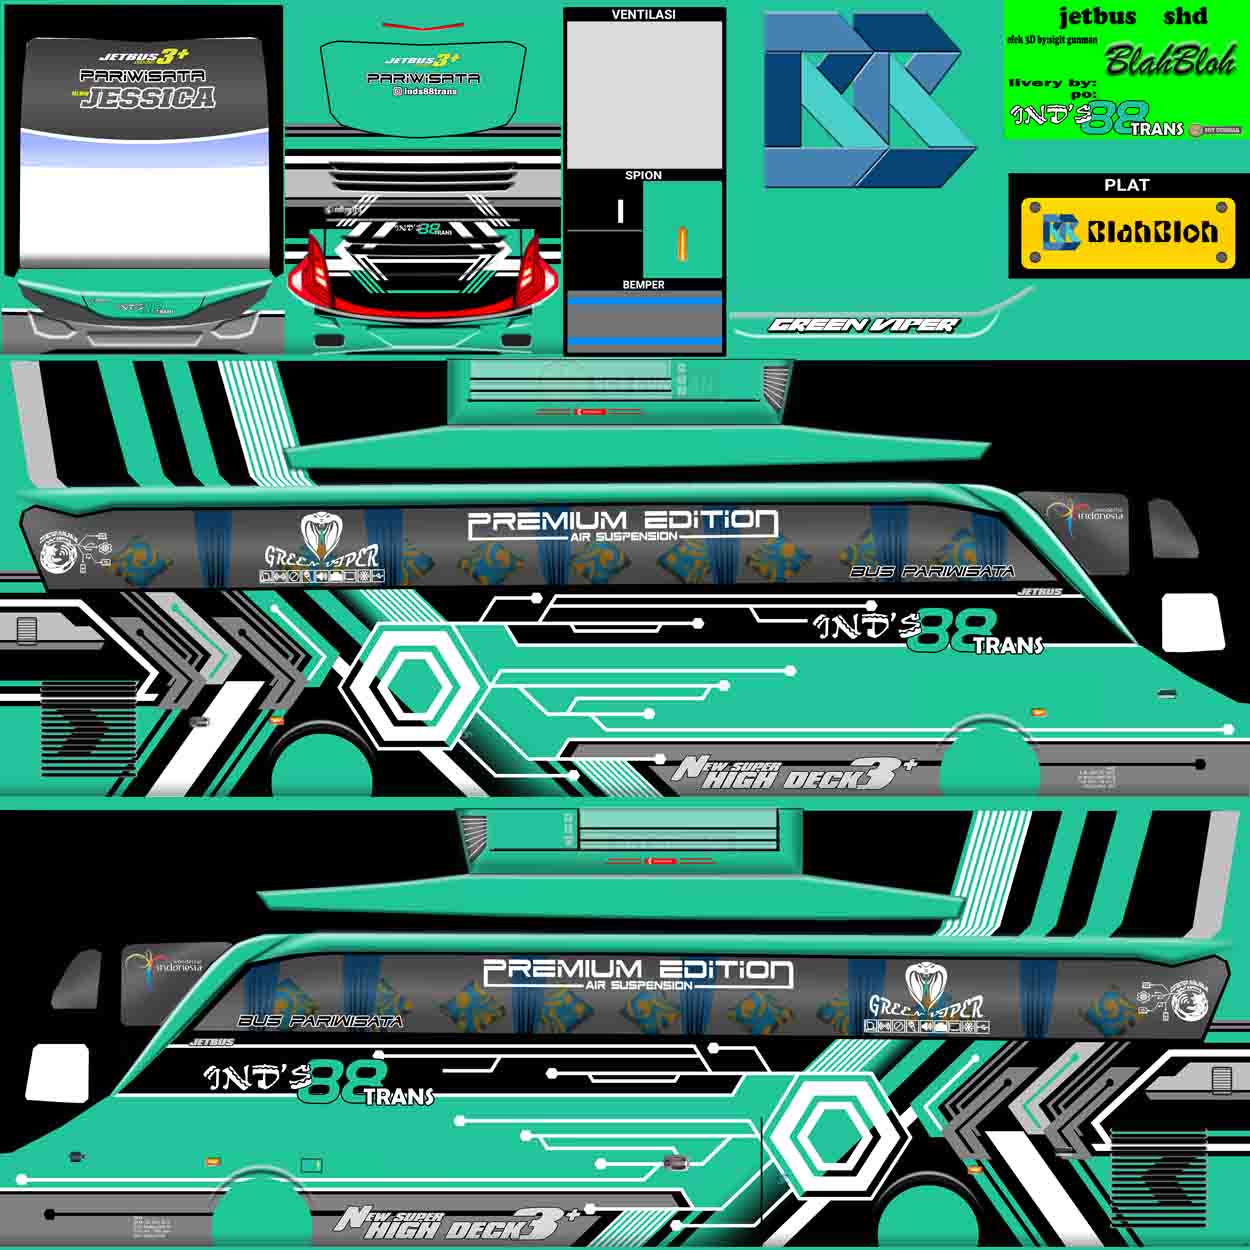 download livery inds 88 trans